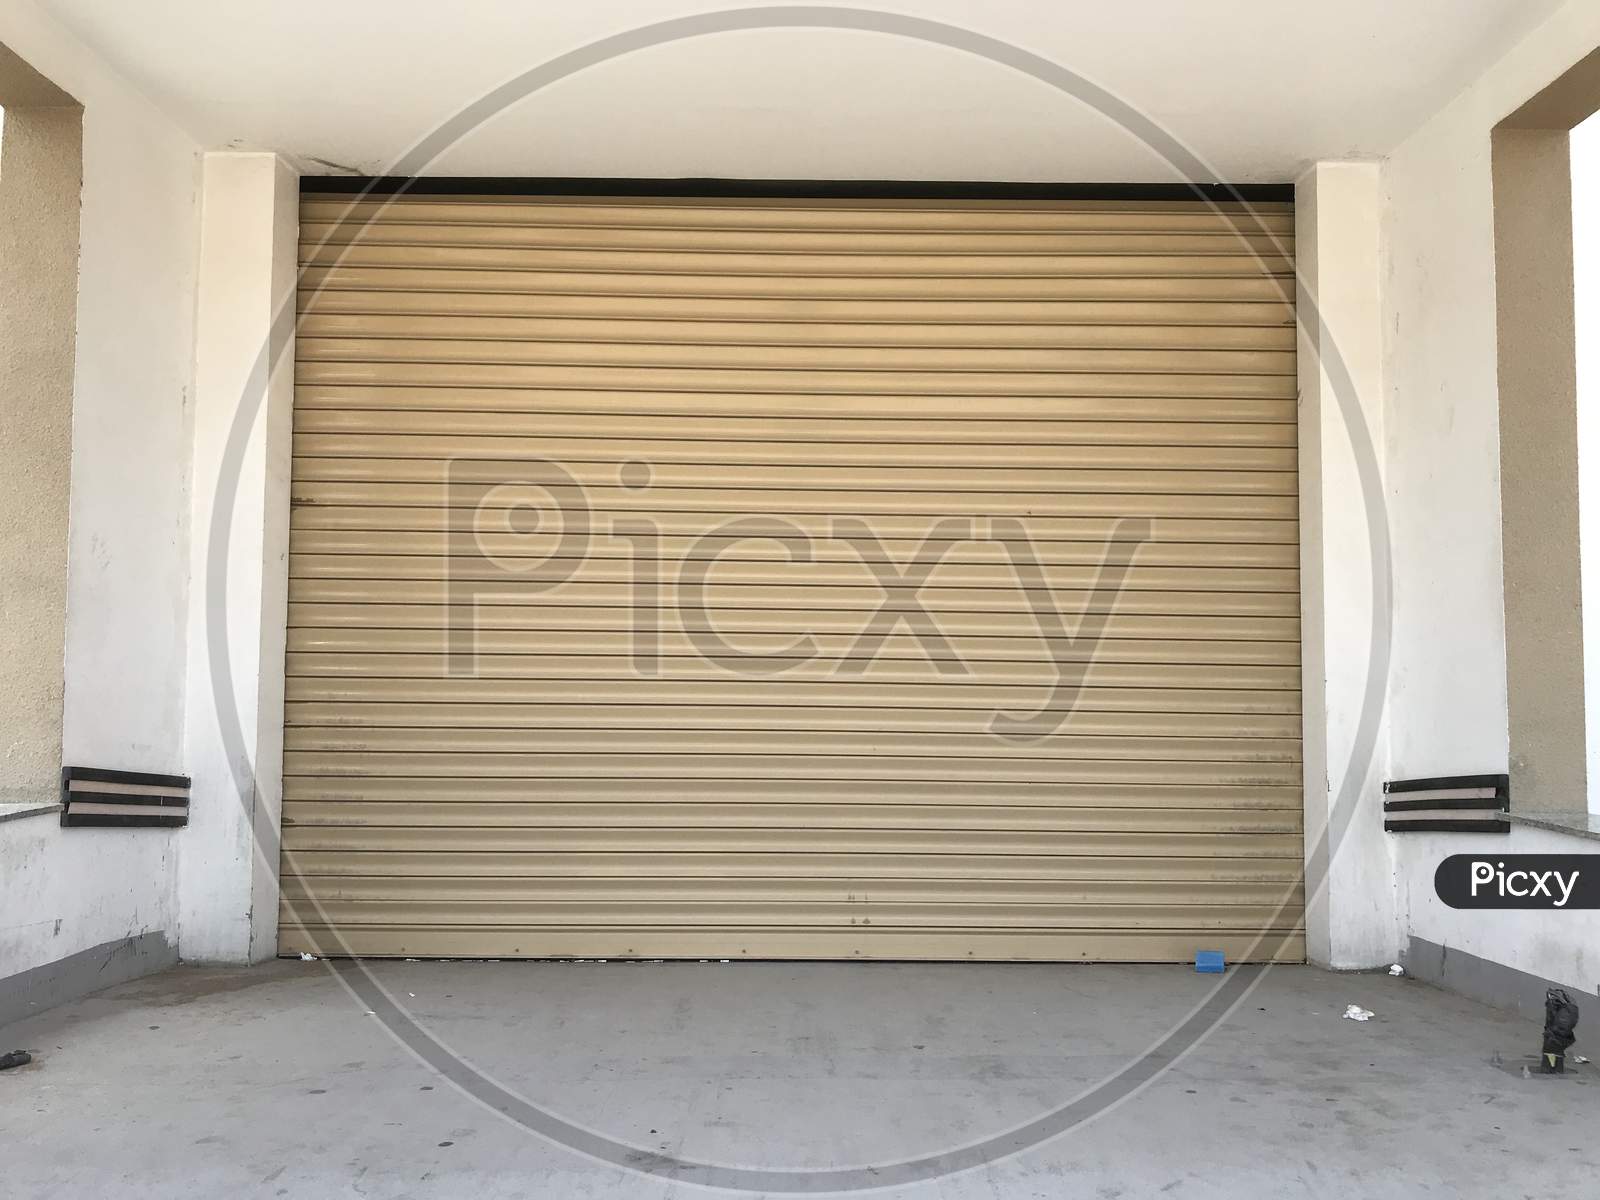 Powder Coated Aluminum Alloy Material Rolling Shutter With Double Insulated Thermal Proof Material Packed Can Be Used For The Car Garage Shop Protection And Full Control Of Protection By Remote